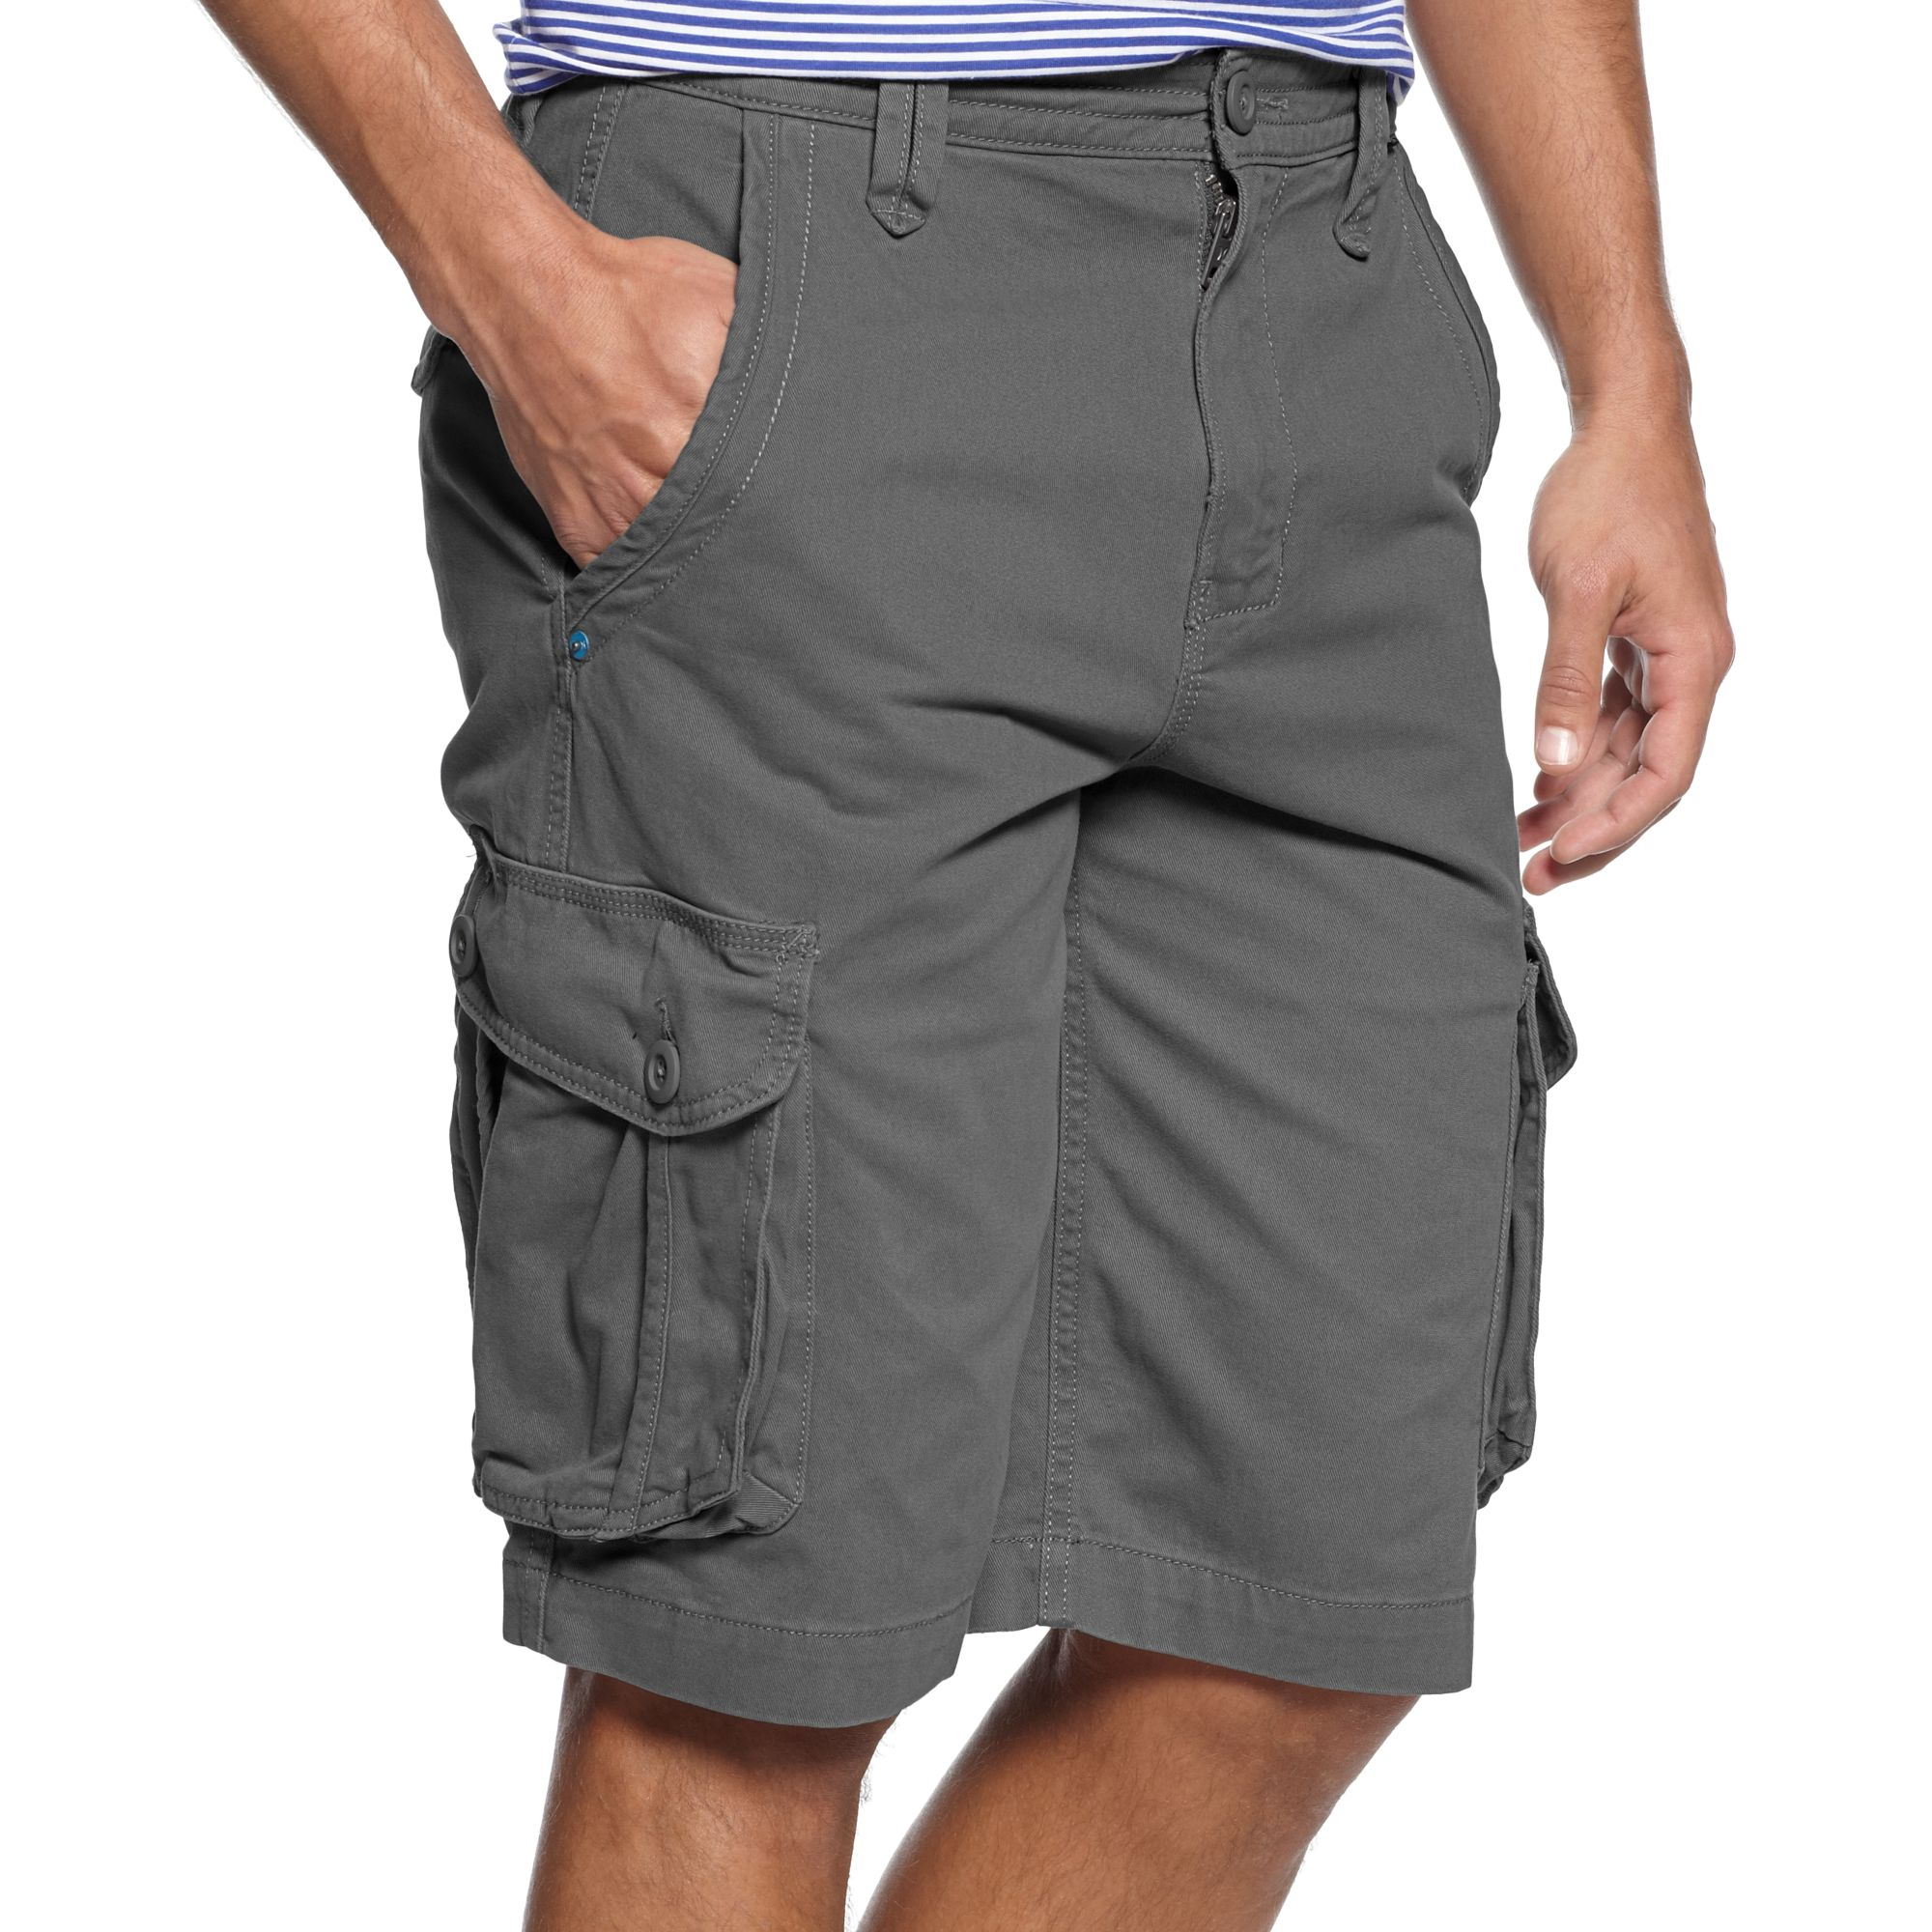 Lyst - Hurley One Only Cargo Shorts in Gray for Men